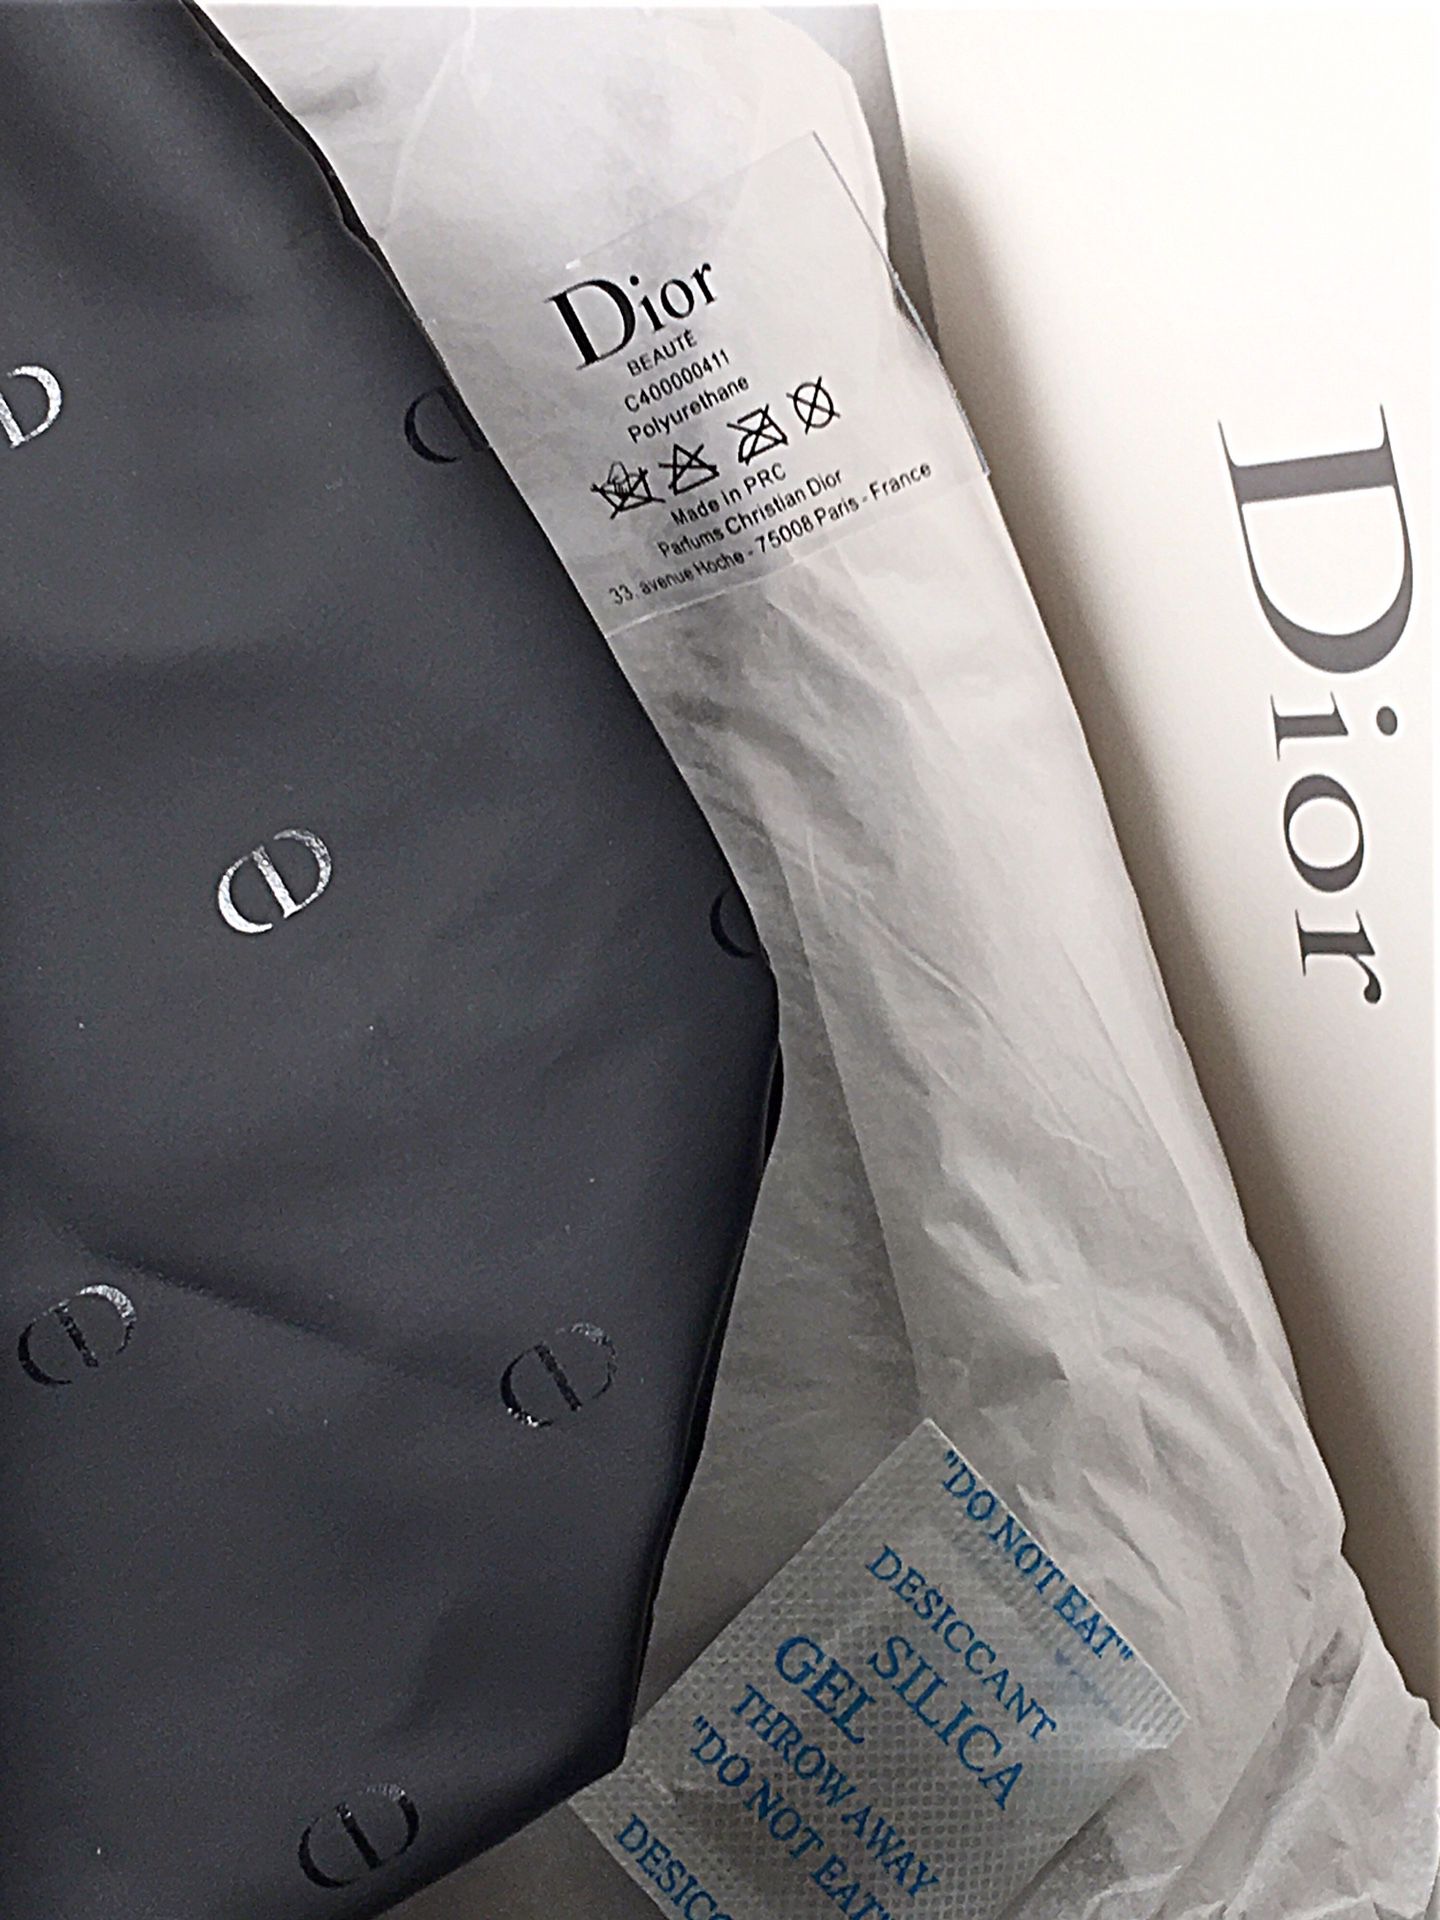 Shop Christian Dior Pouches & Cosmetic Bags by CUOREバイマ店